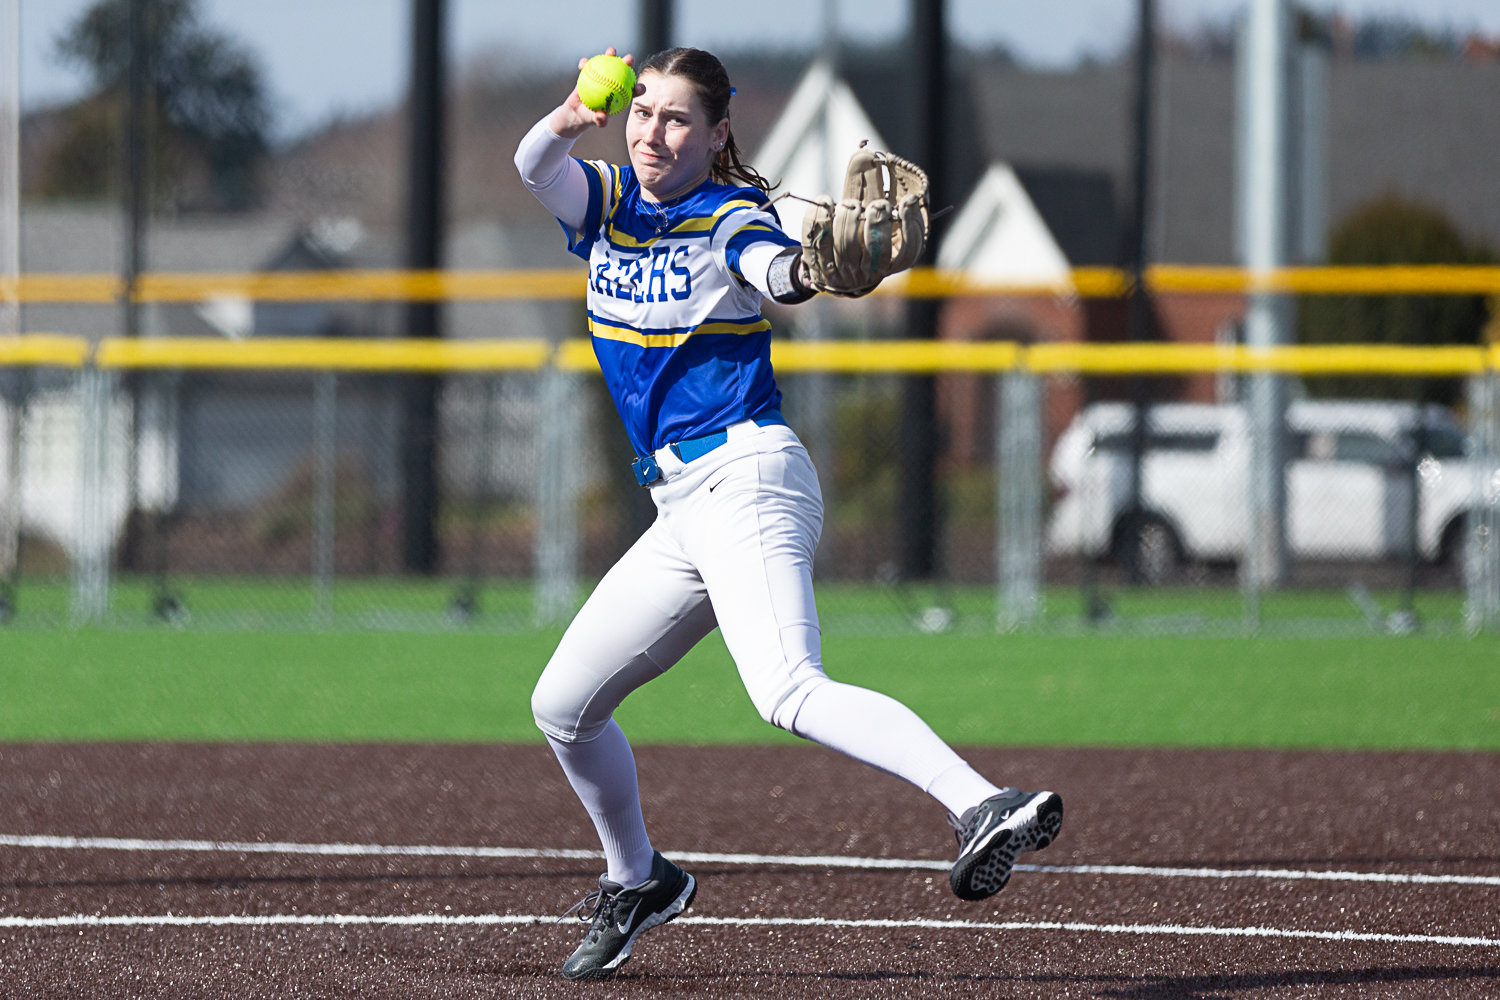 Centralia College righty Paige Bryant throws a pitch against Clark in Centralia March 17.